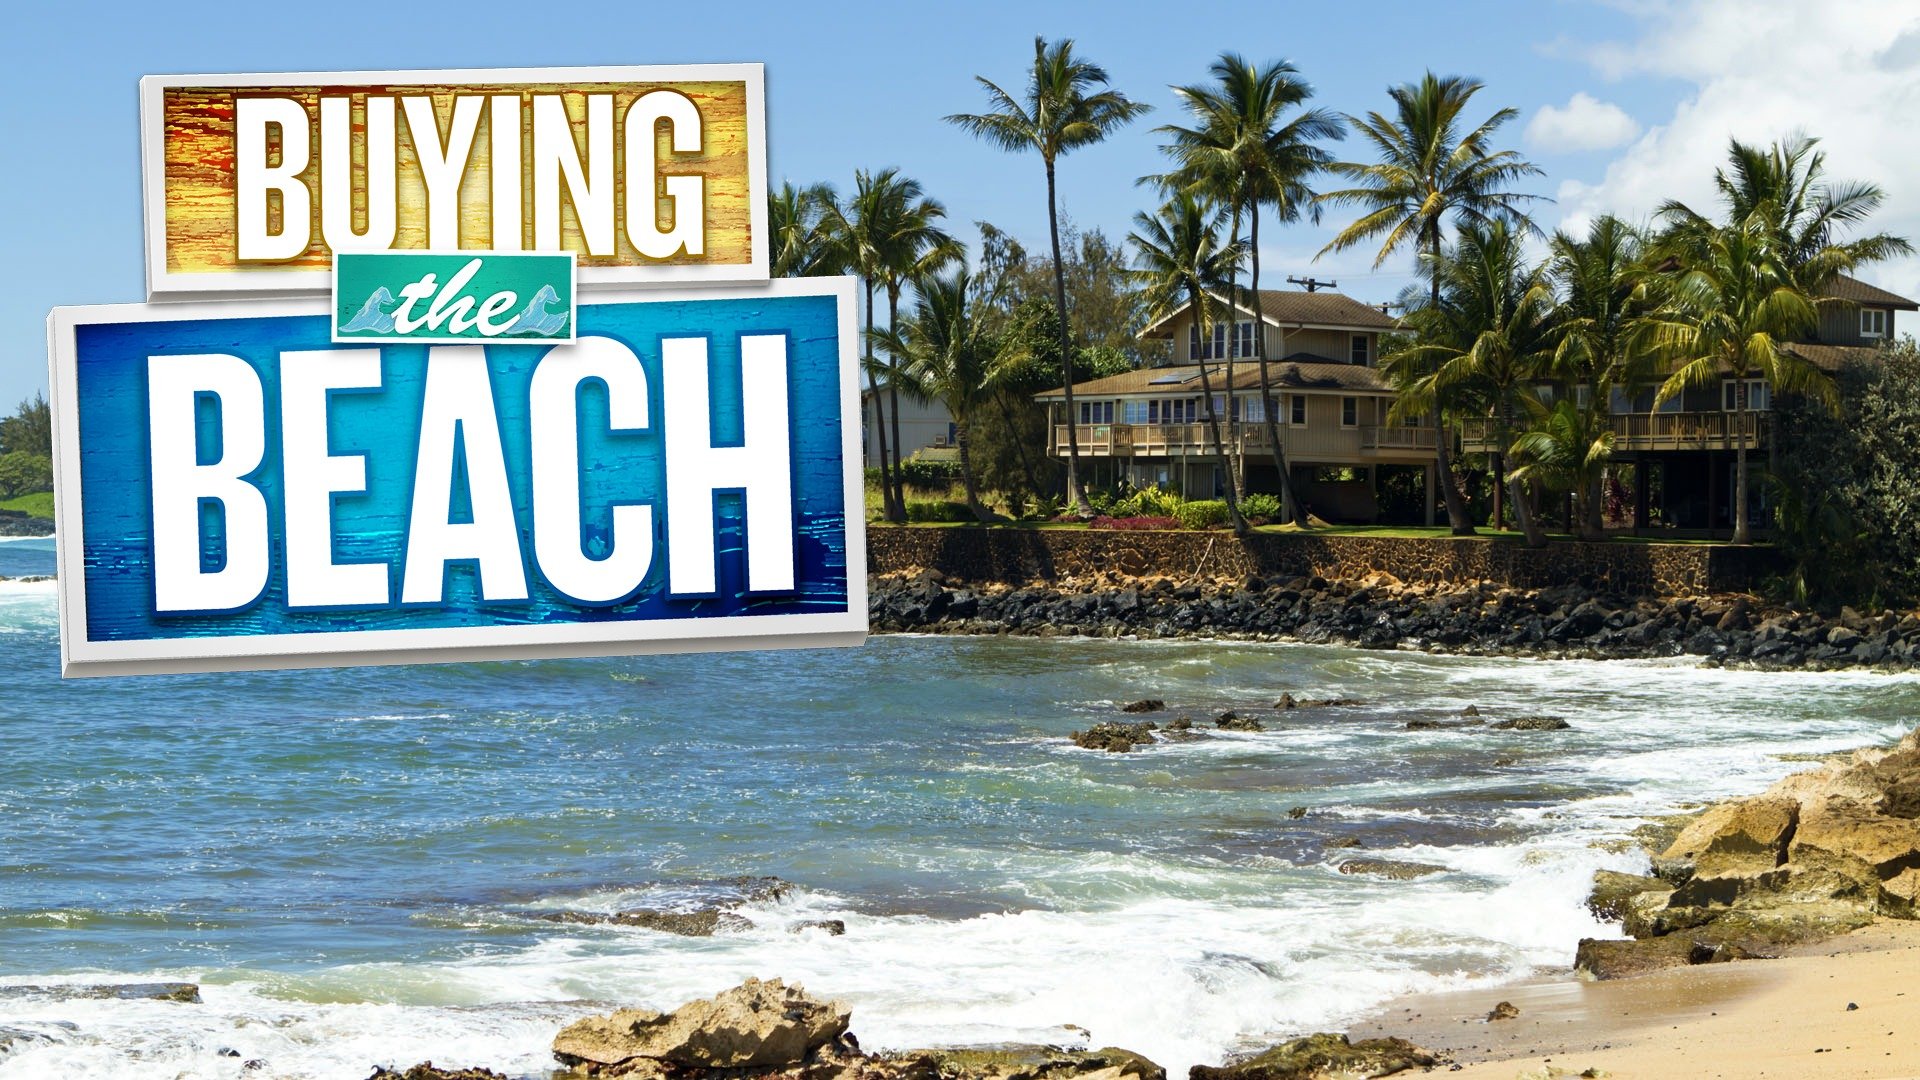 Buying the Beach - Destination America Reality Series